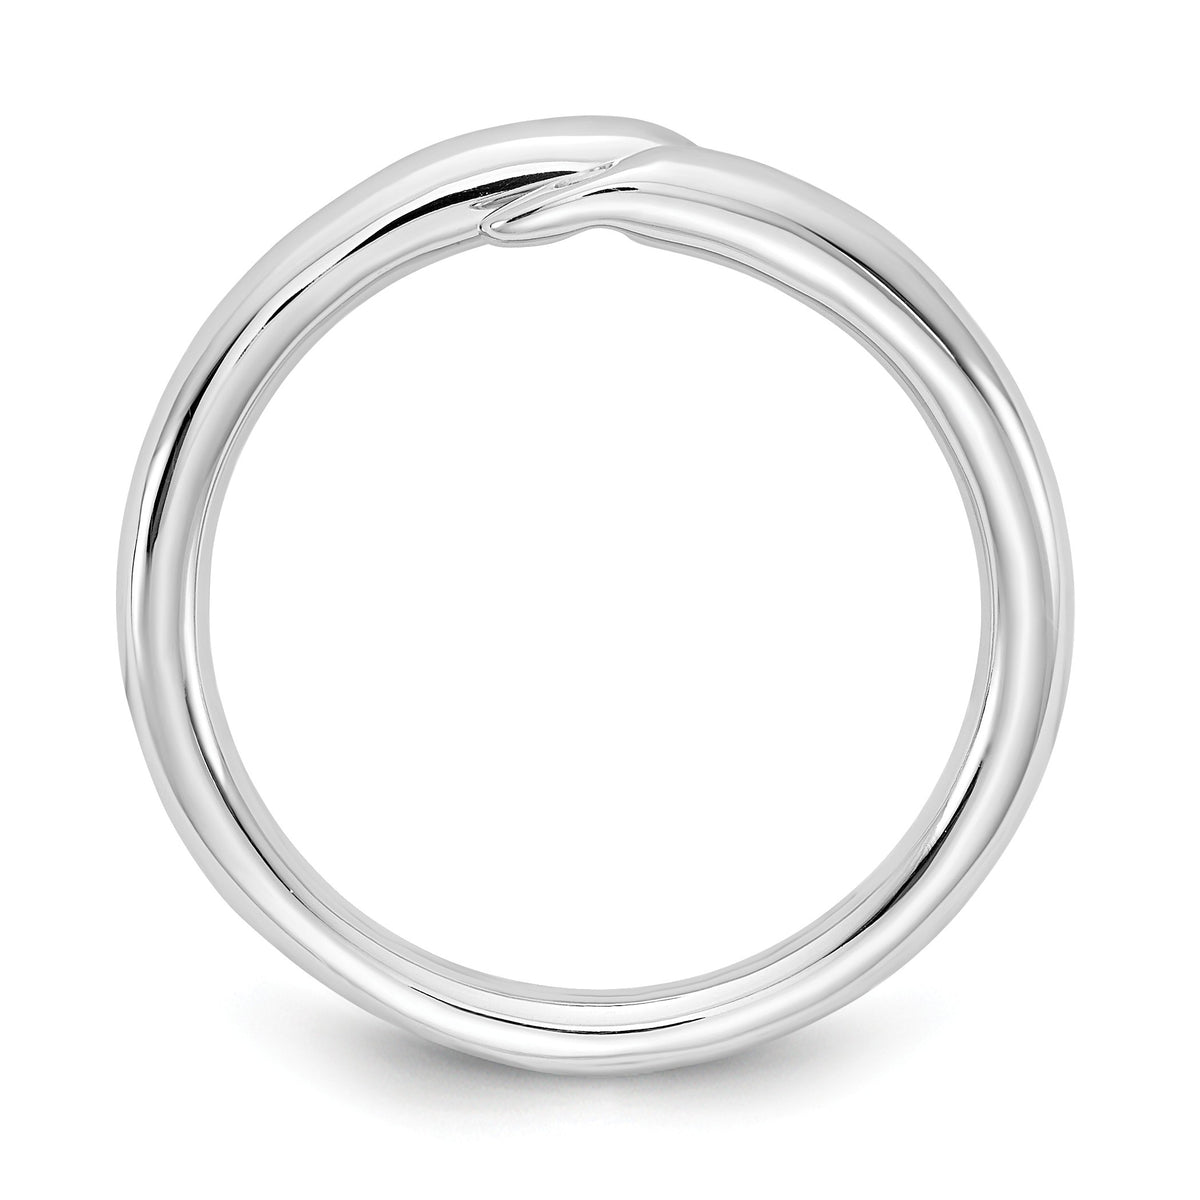 Alternate view of the .02 Ctw Diamond Bypass Ring in Rhodium Plated Sterling Silver by The Black Bow Jewelry Co.